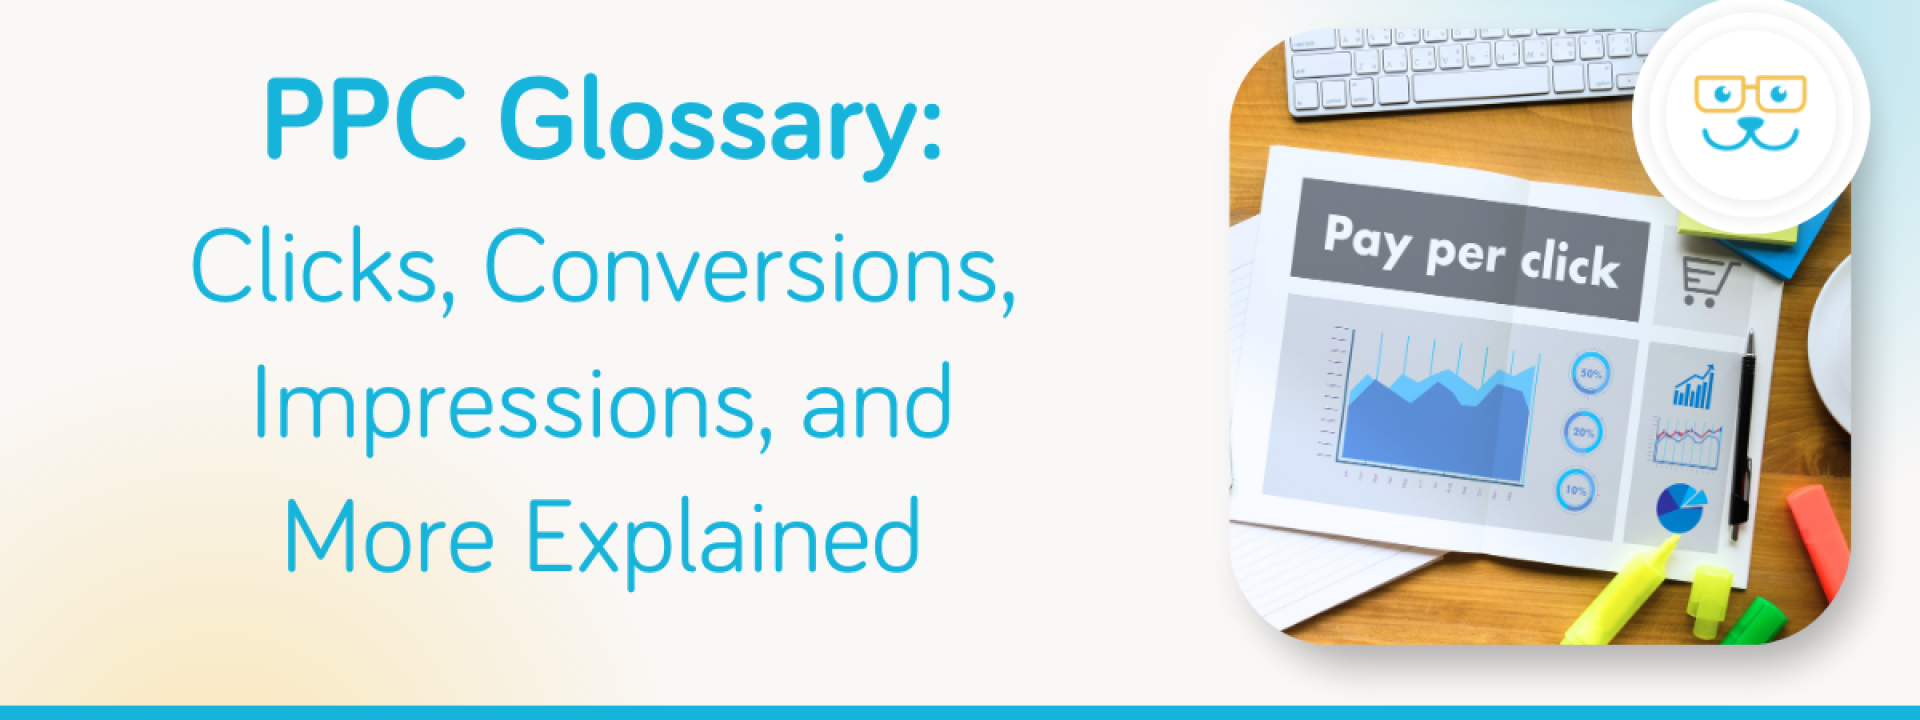 PPC Glossary Clicks, Conversions, Impressions and More Explained